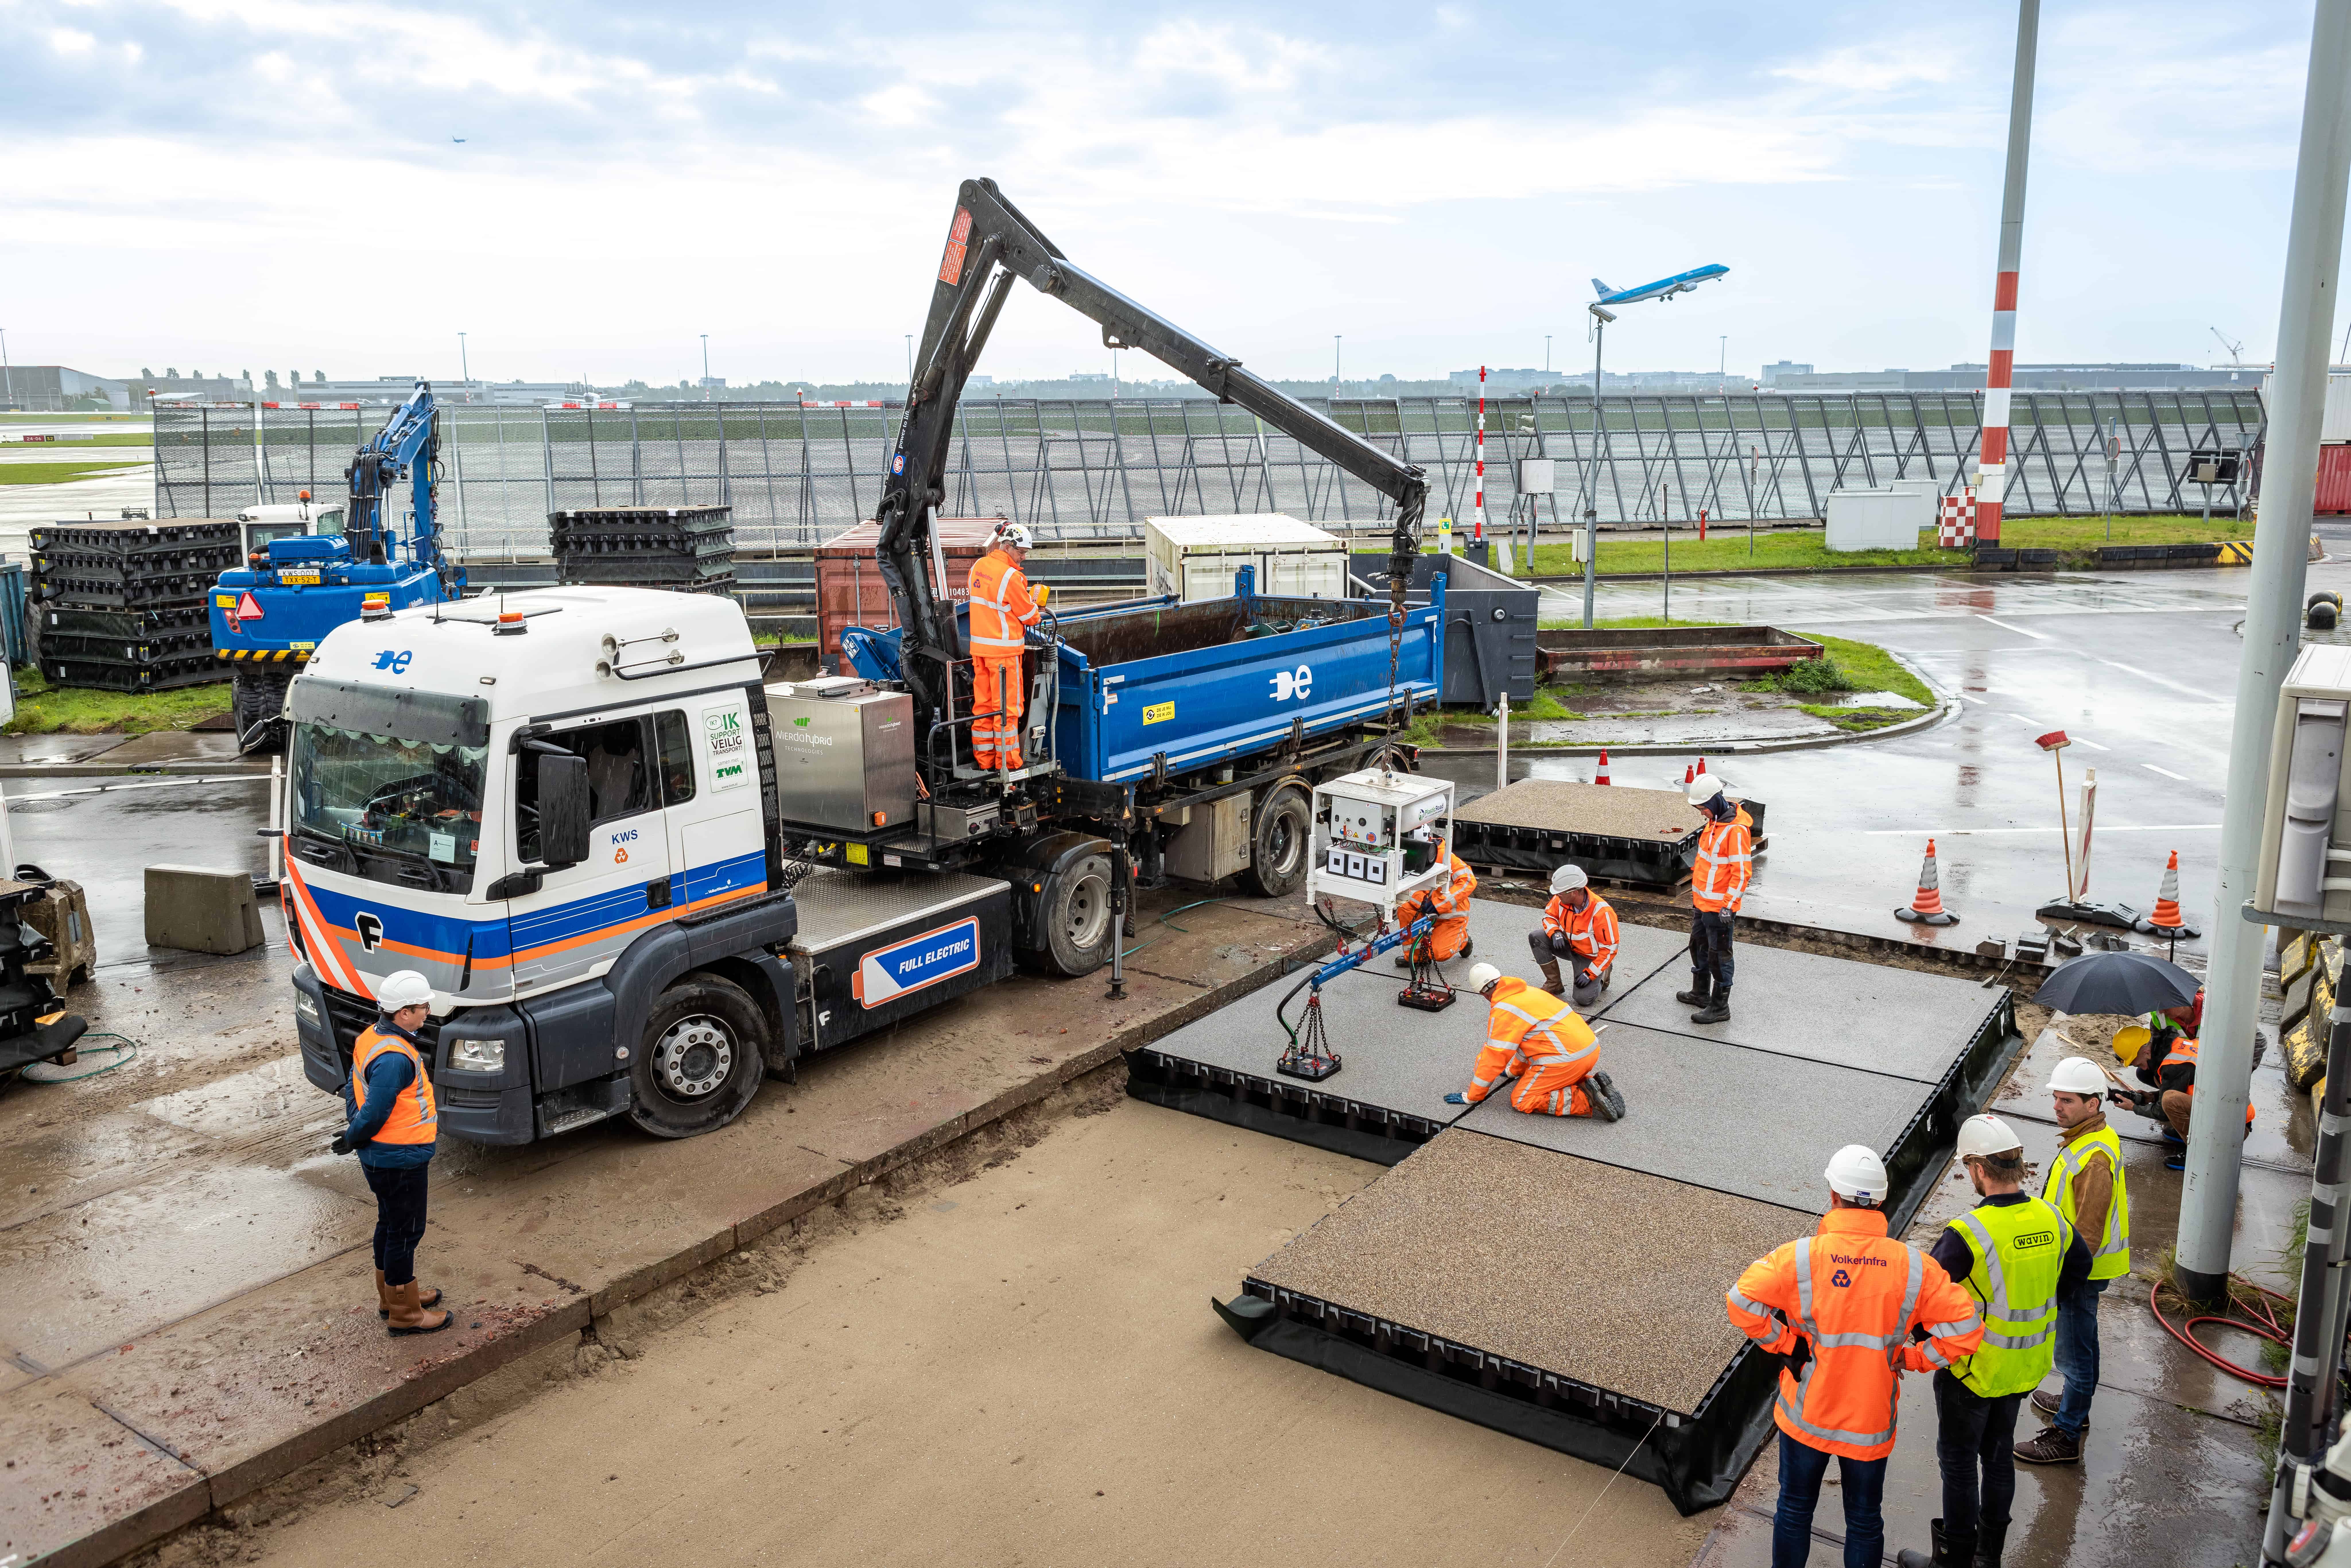 Schiphol airport builds road and parking bays made from plastic waste